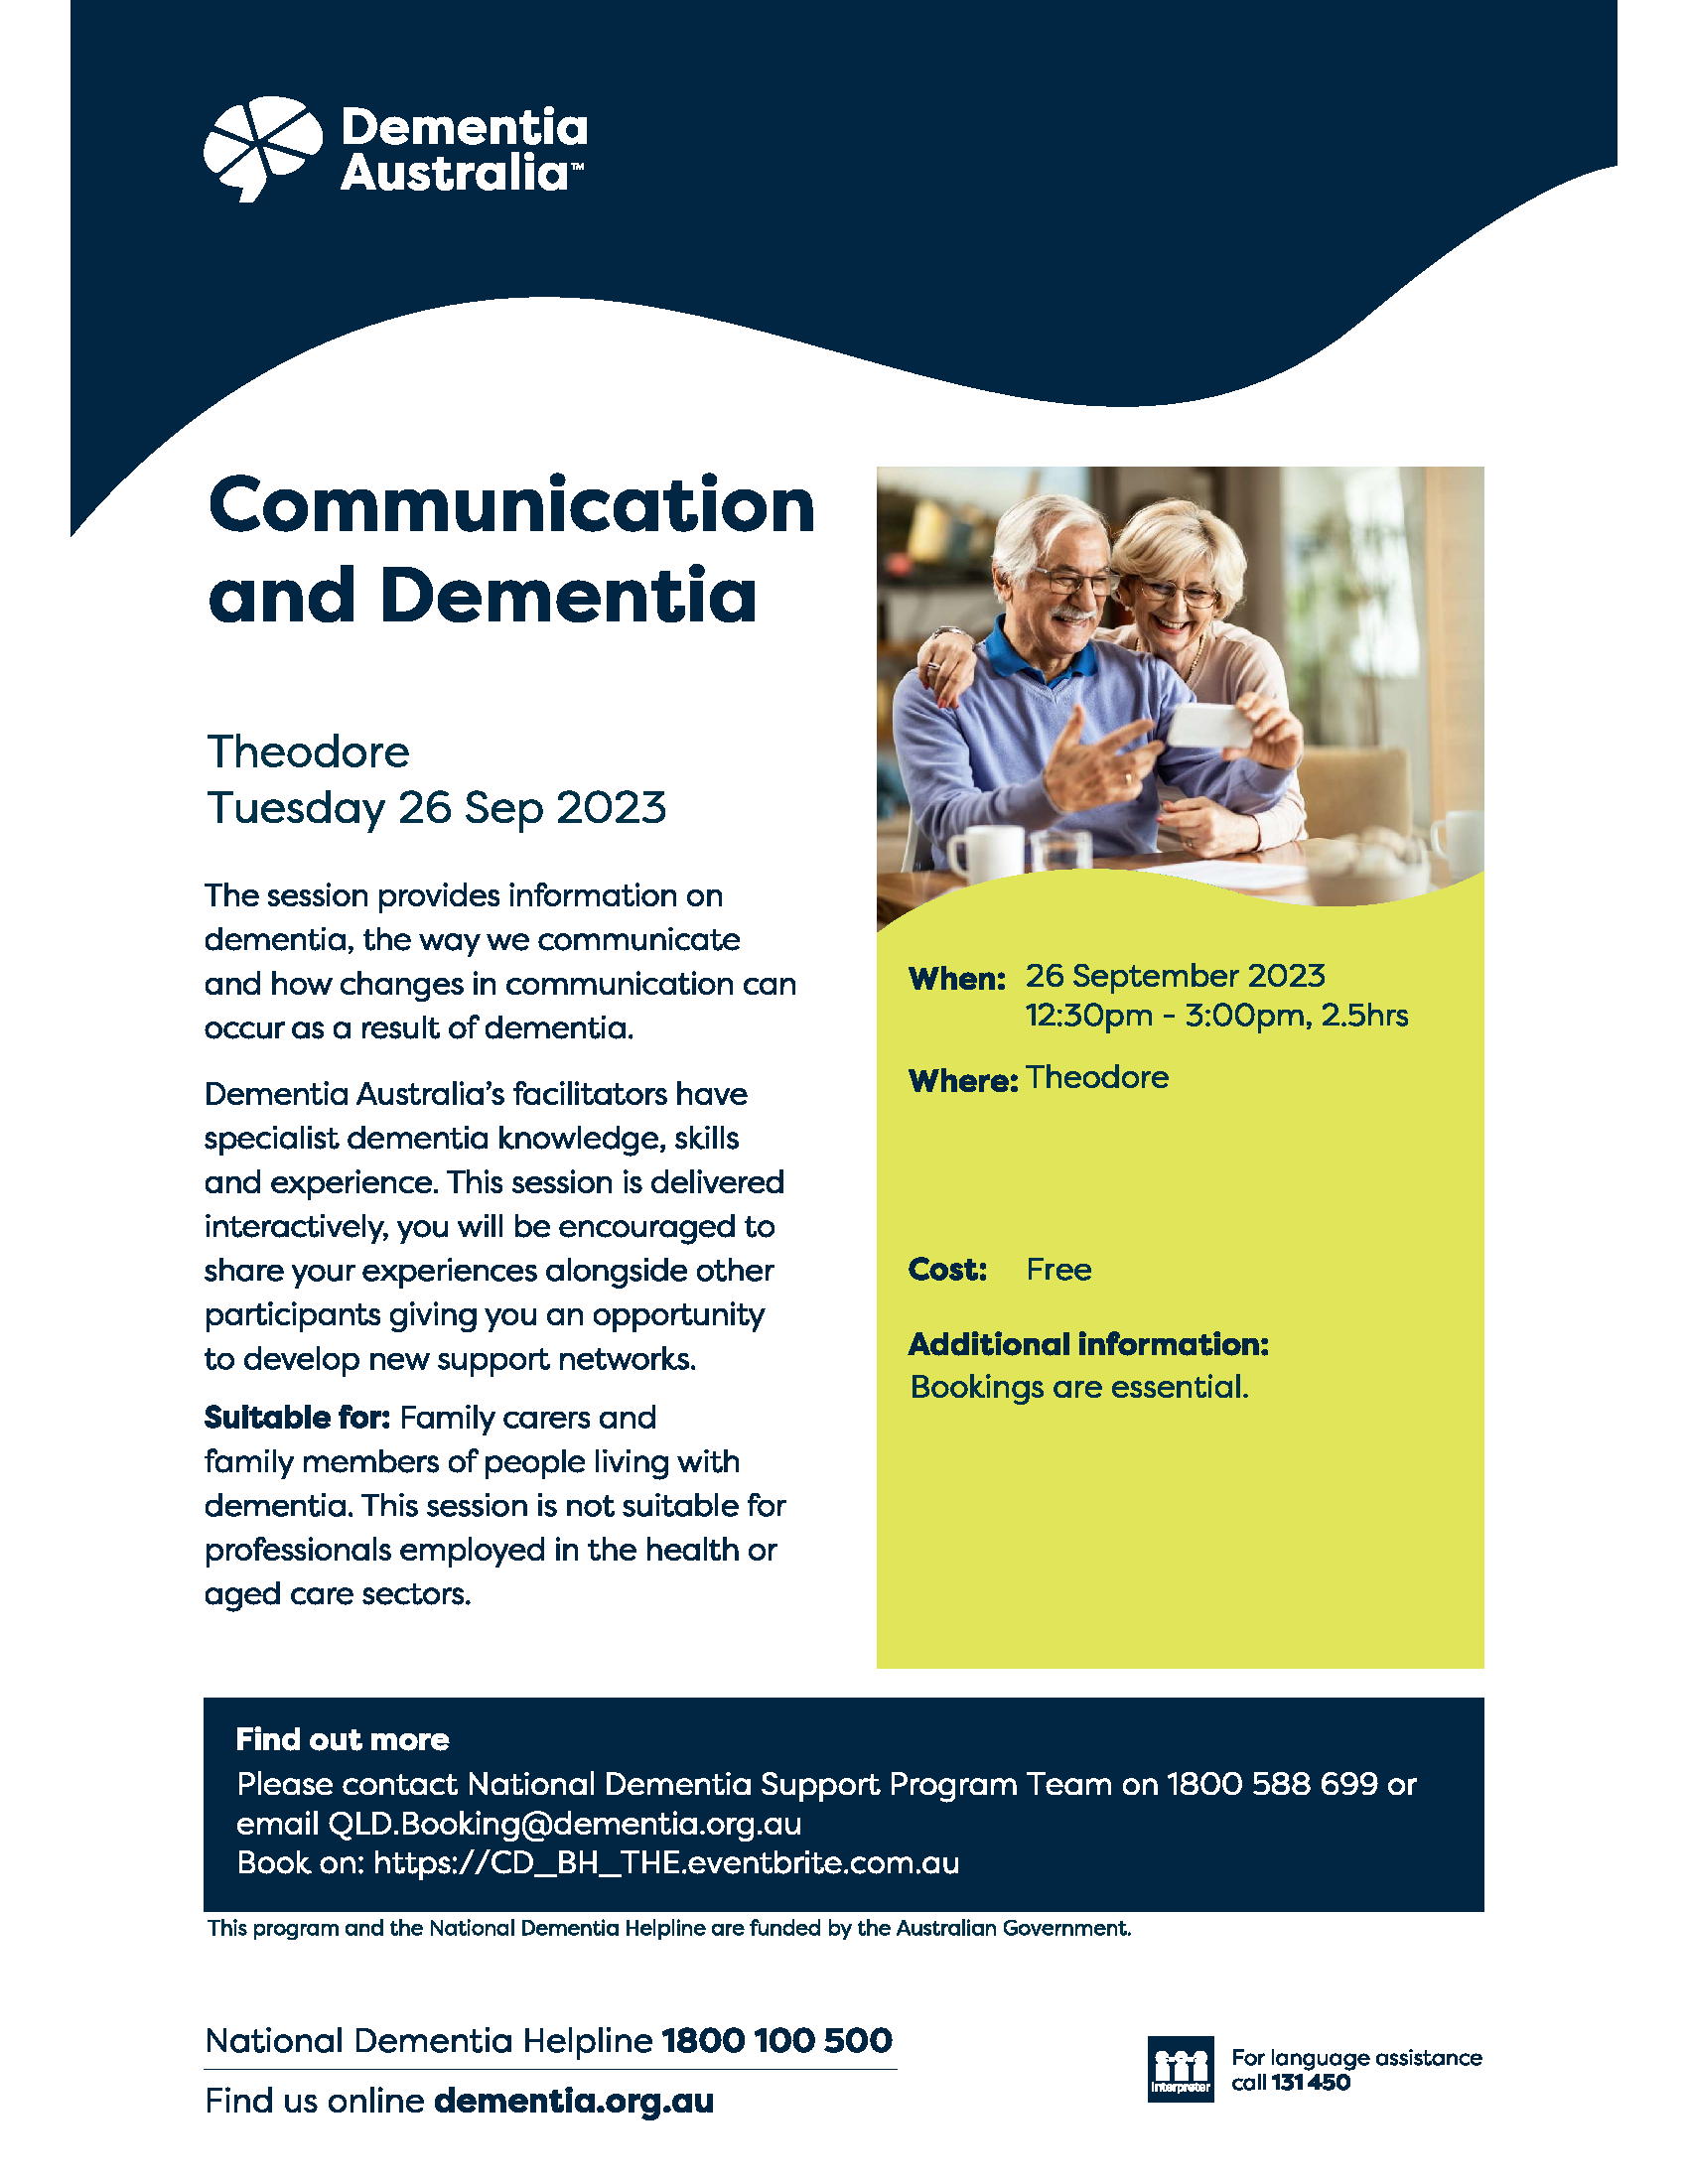 Communication and dementia theodore 260923 1